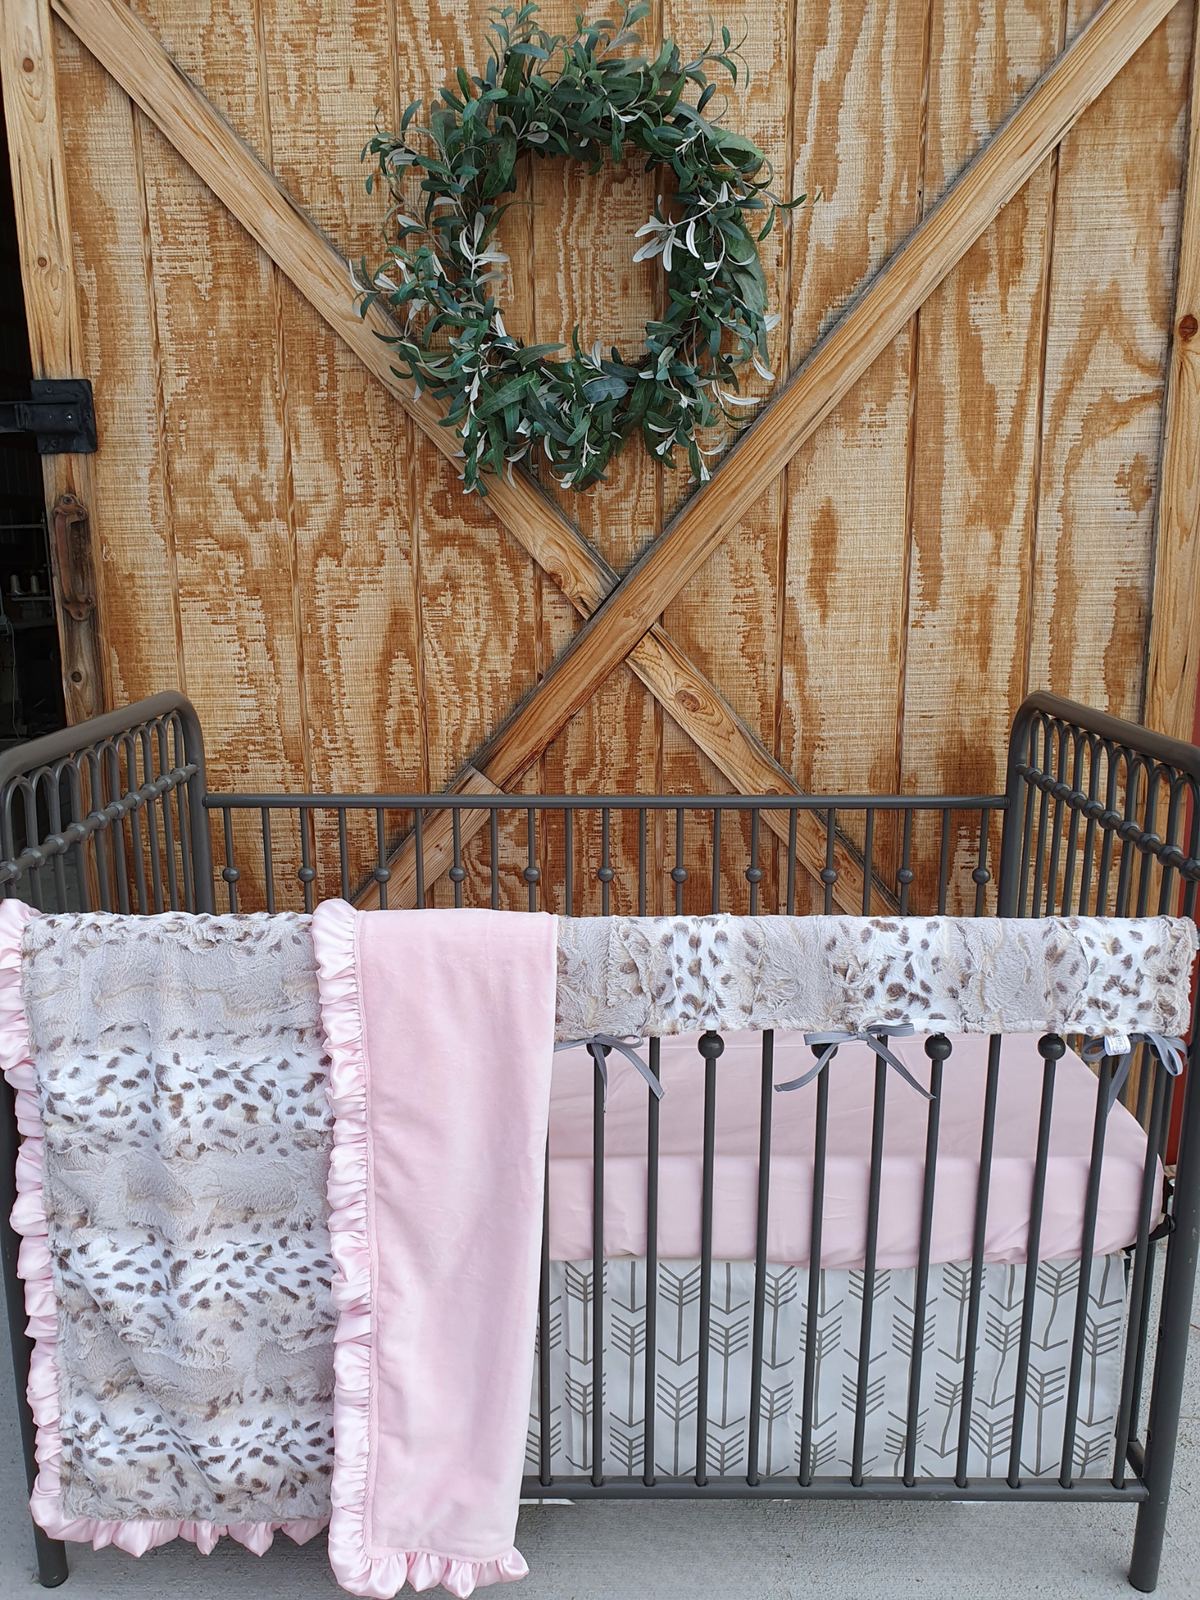 New Release Girl Crib Bedding- Lynx Minky and Blush Baby Bedding Collection - DBC Baby Bedding Co 